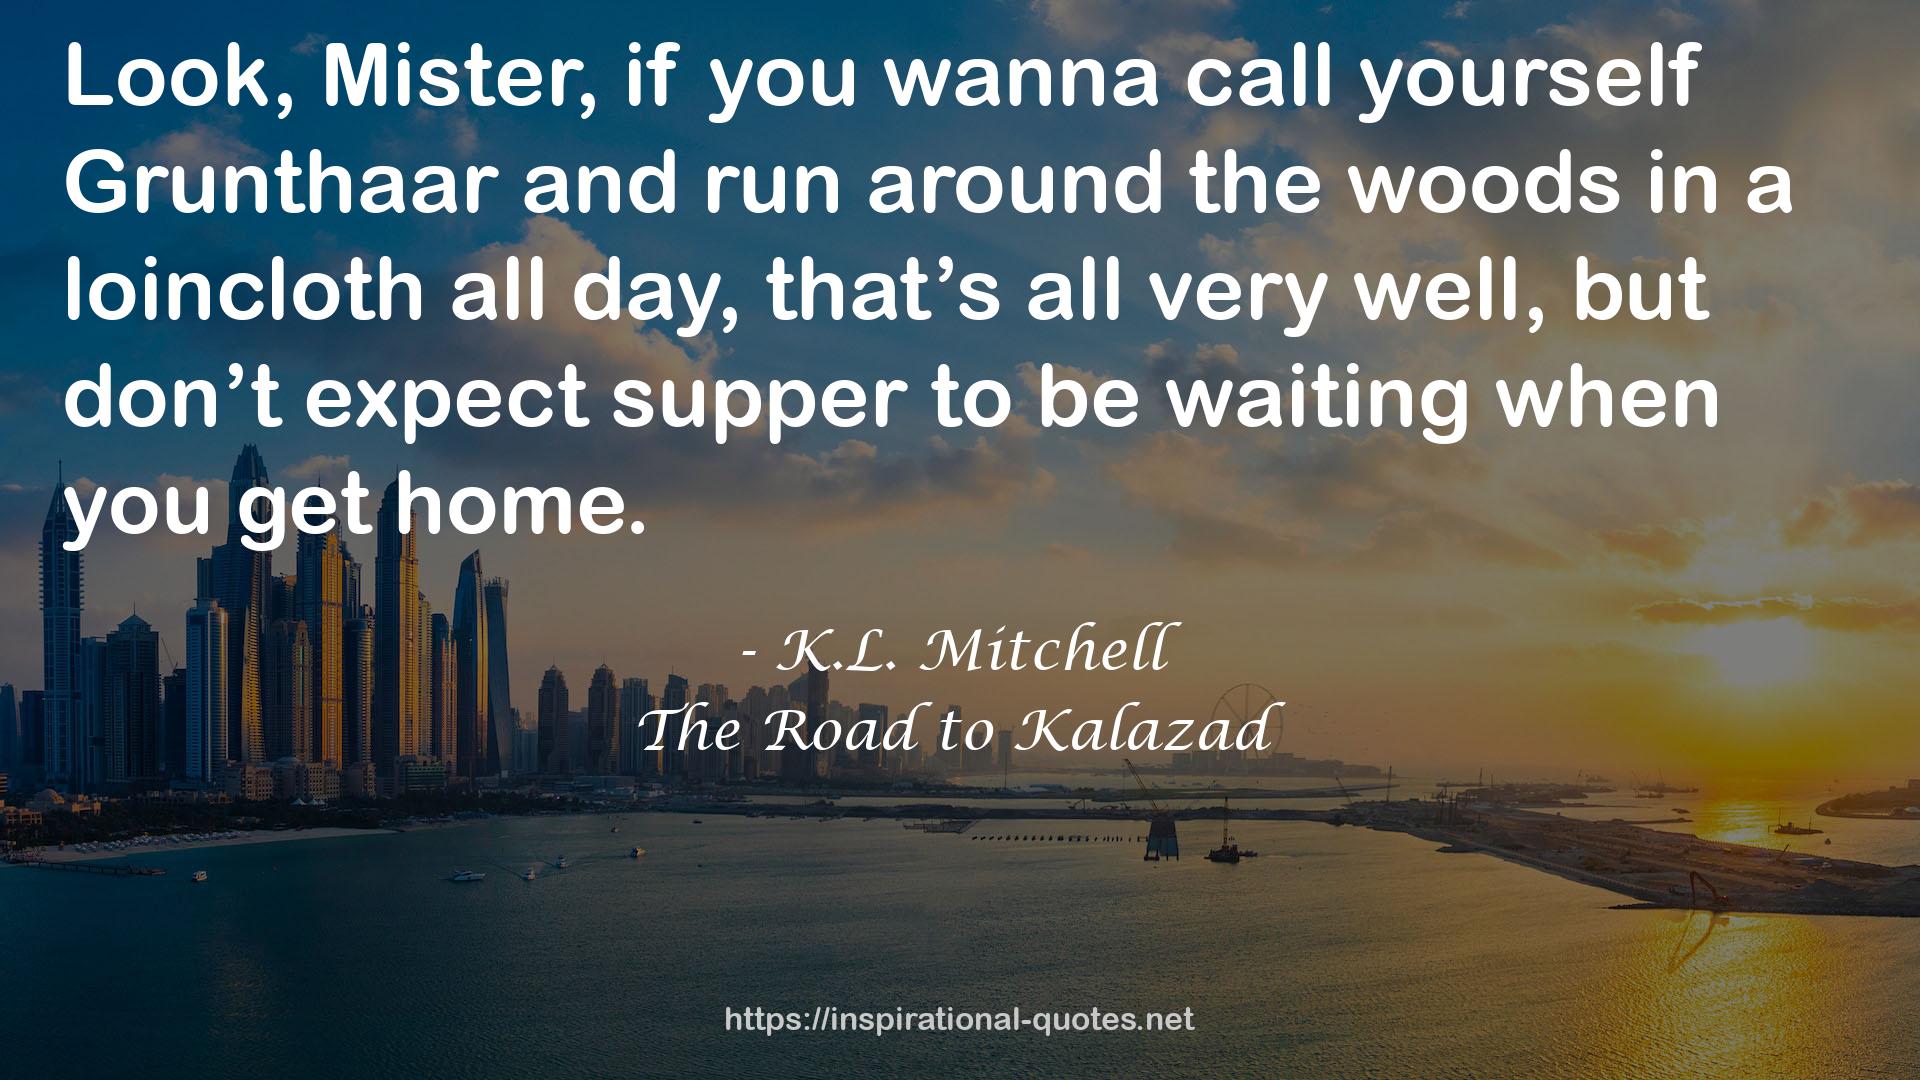 K.L. Mitchell QUOTES